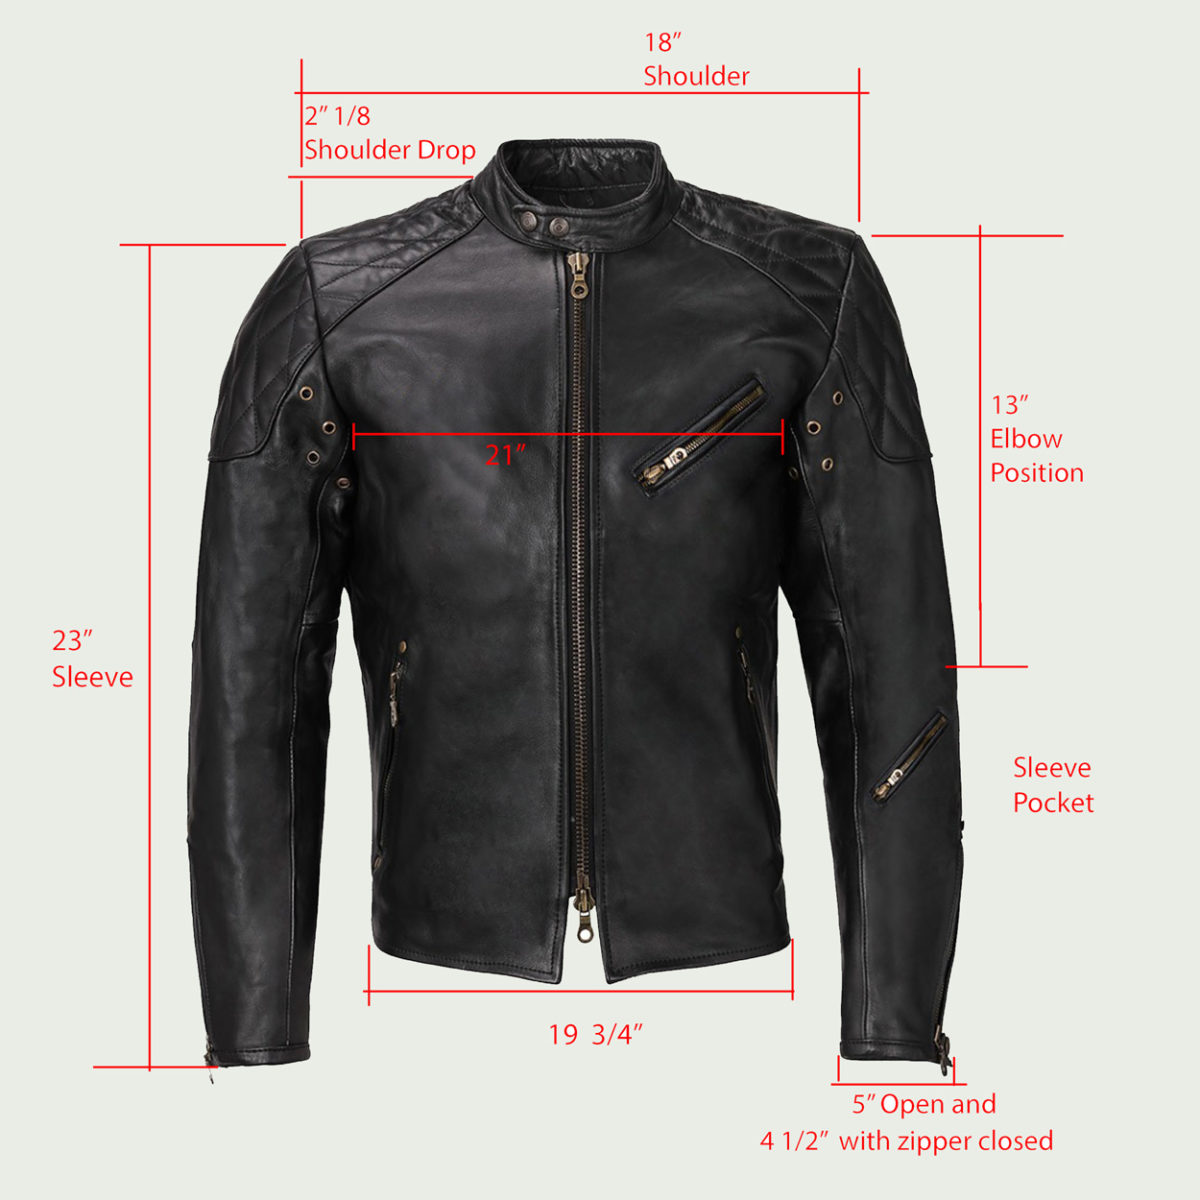 Design Your Own Custom Motorcycle Gear | Bike EXIF